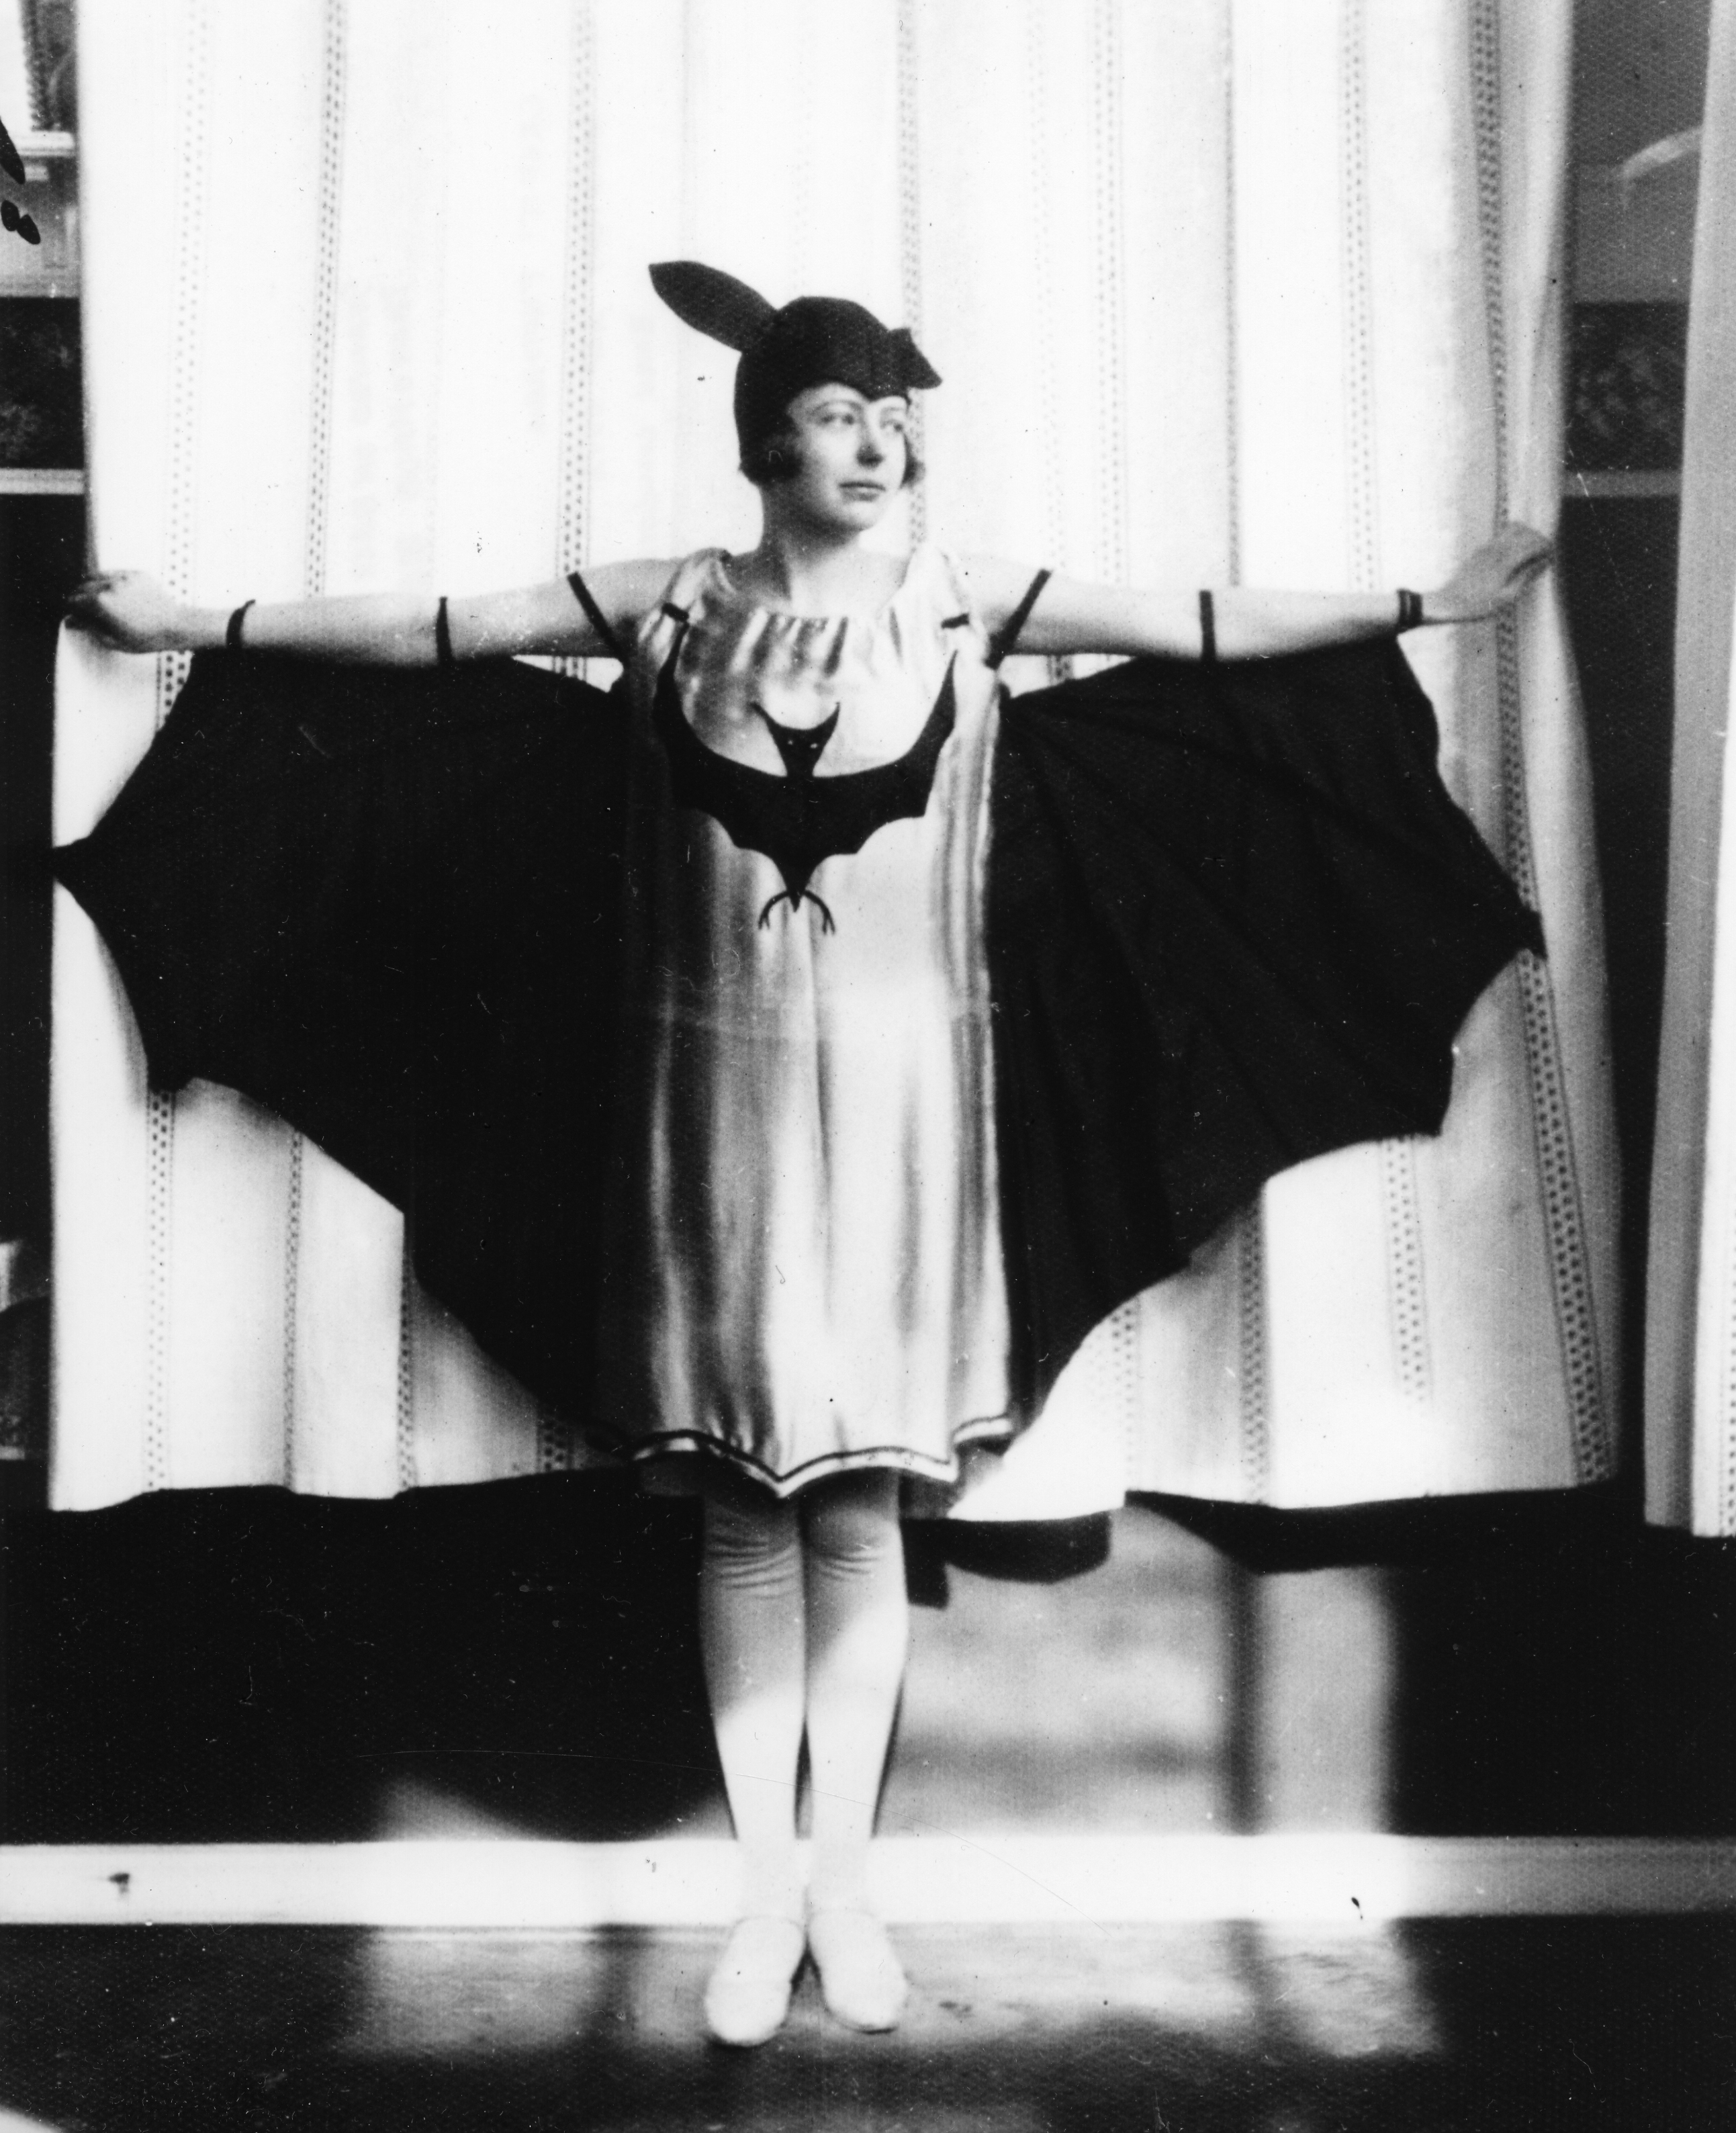 Maria Geoppert Mayer, who was awarded the Nobel Prize in Physics for proposing the nuclear shell model of the atom, is seen tapping into her “spooky side” in a bat costume.